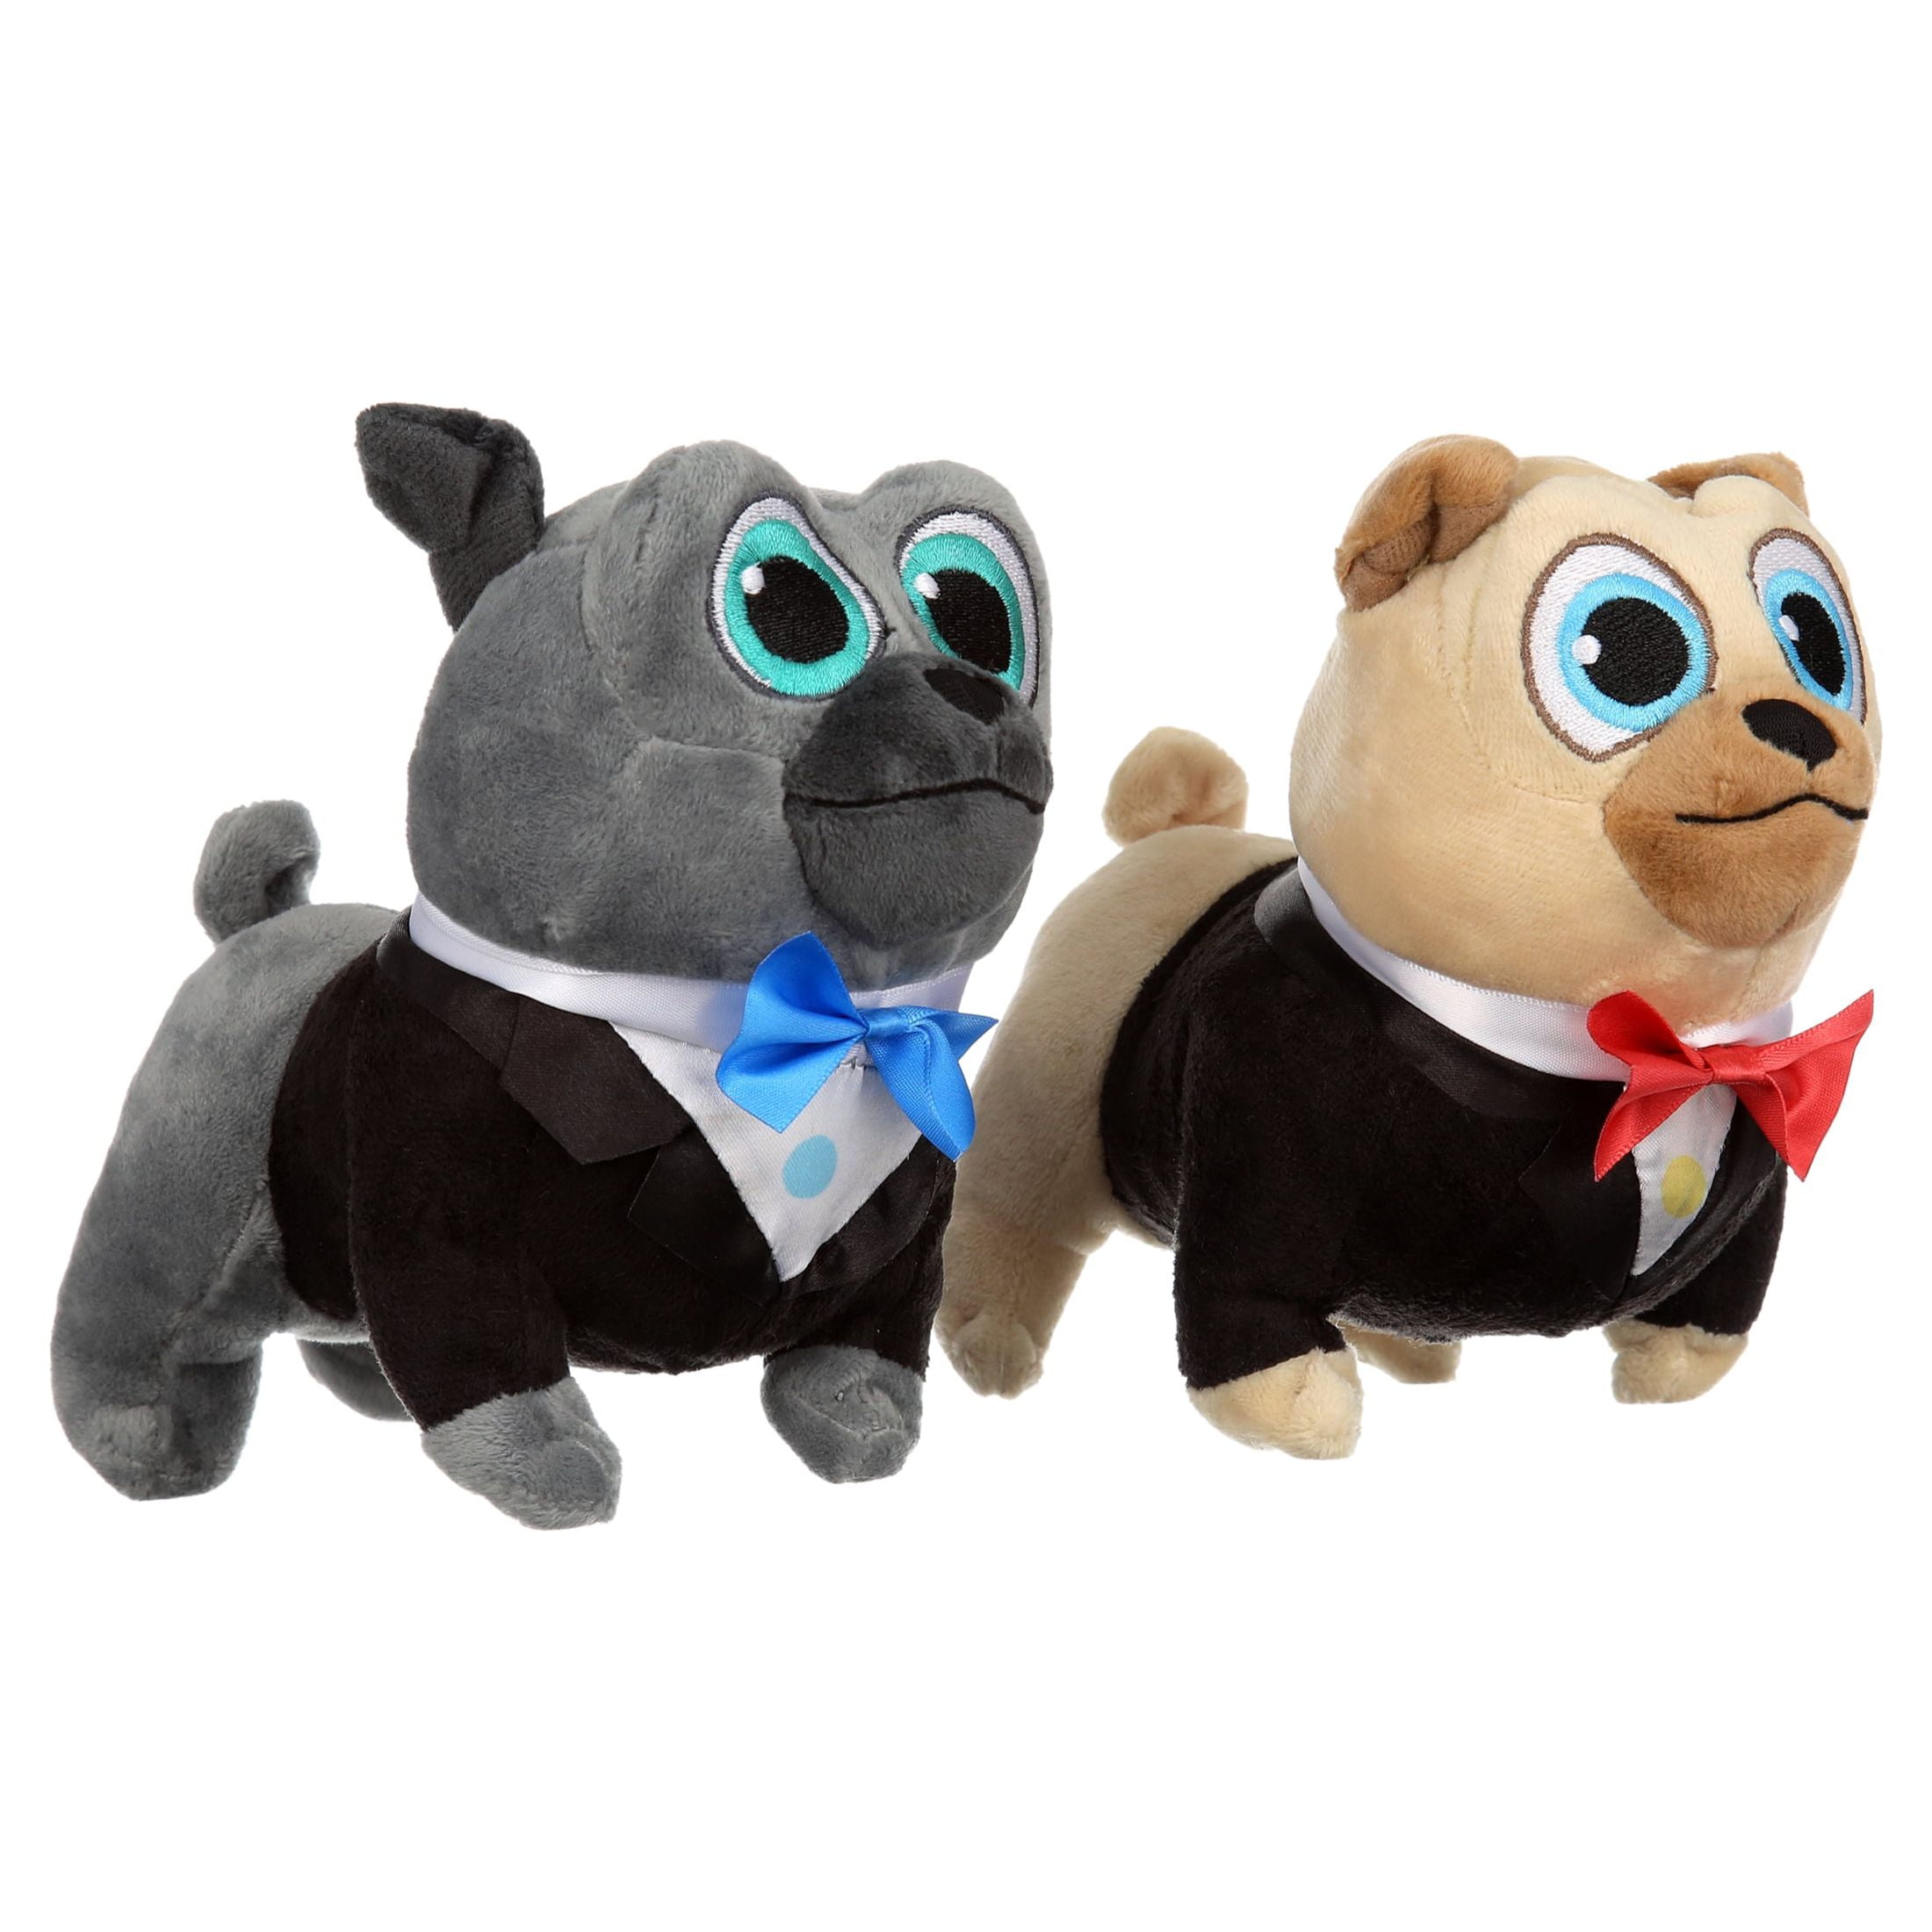 2-Count Puppy Dog Pals Small Plush Toy (Bingo & Rolly) $4.49 + Free S&H w/ Walmart+ or $35+